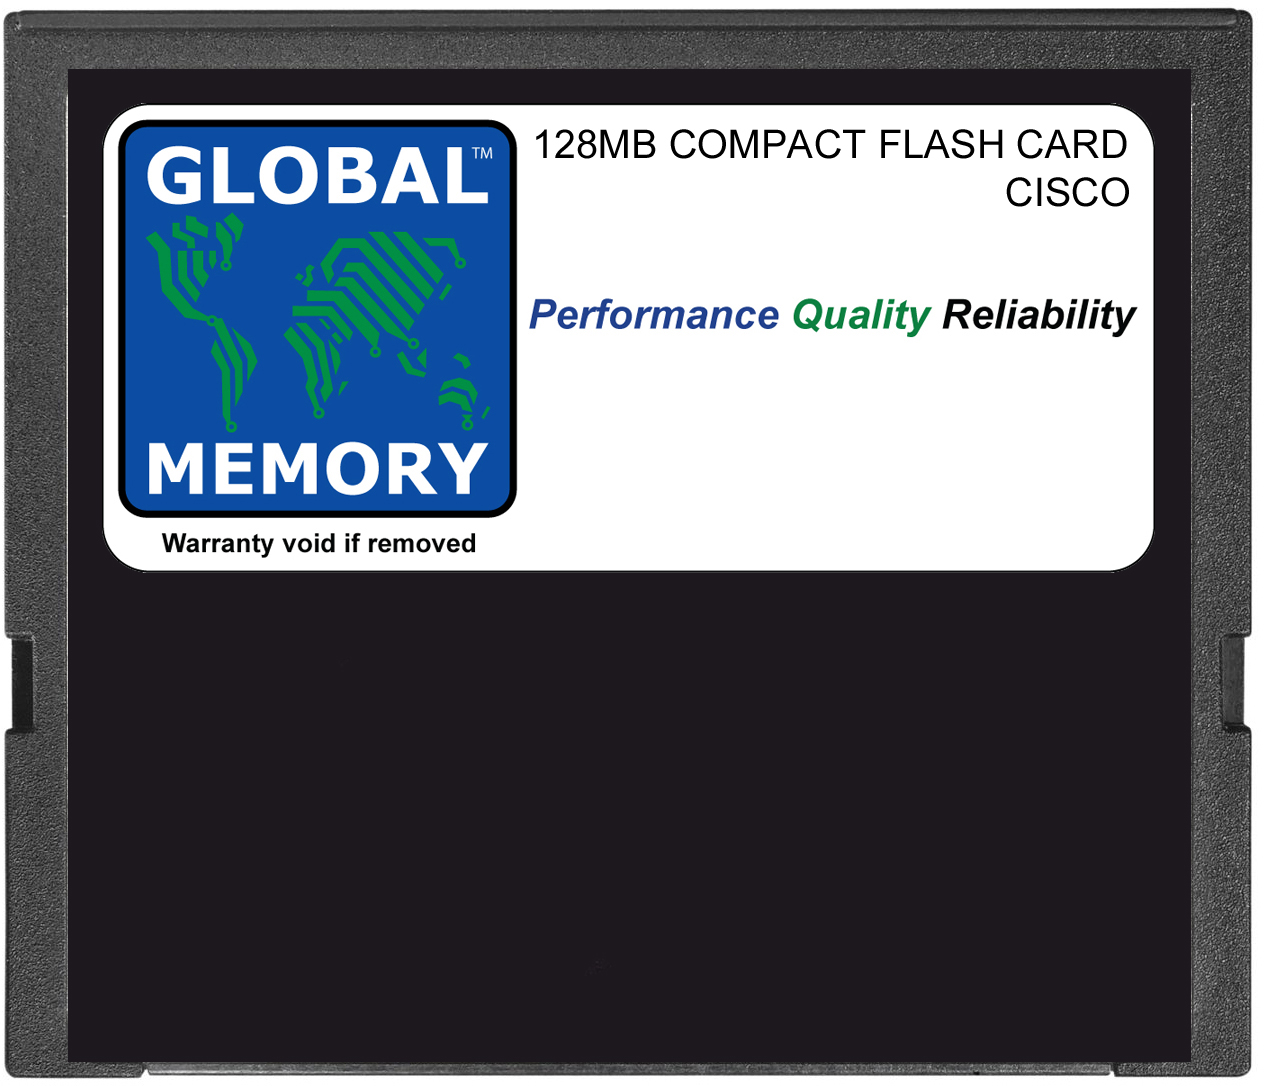 128MB COMPACT FLASH CARD MEMORY FOR CISCO 3745 ROUTER (MEM3745-128CF)